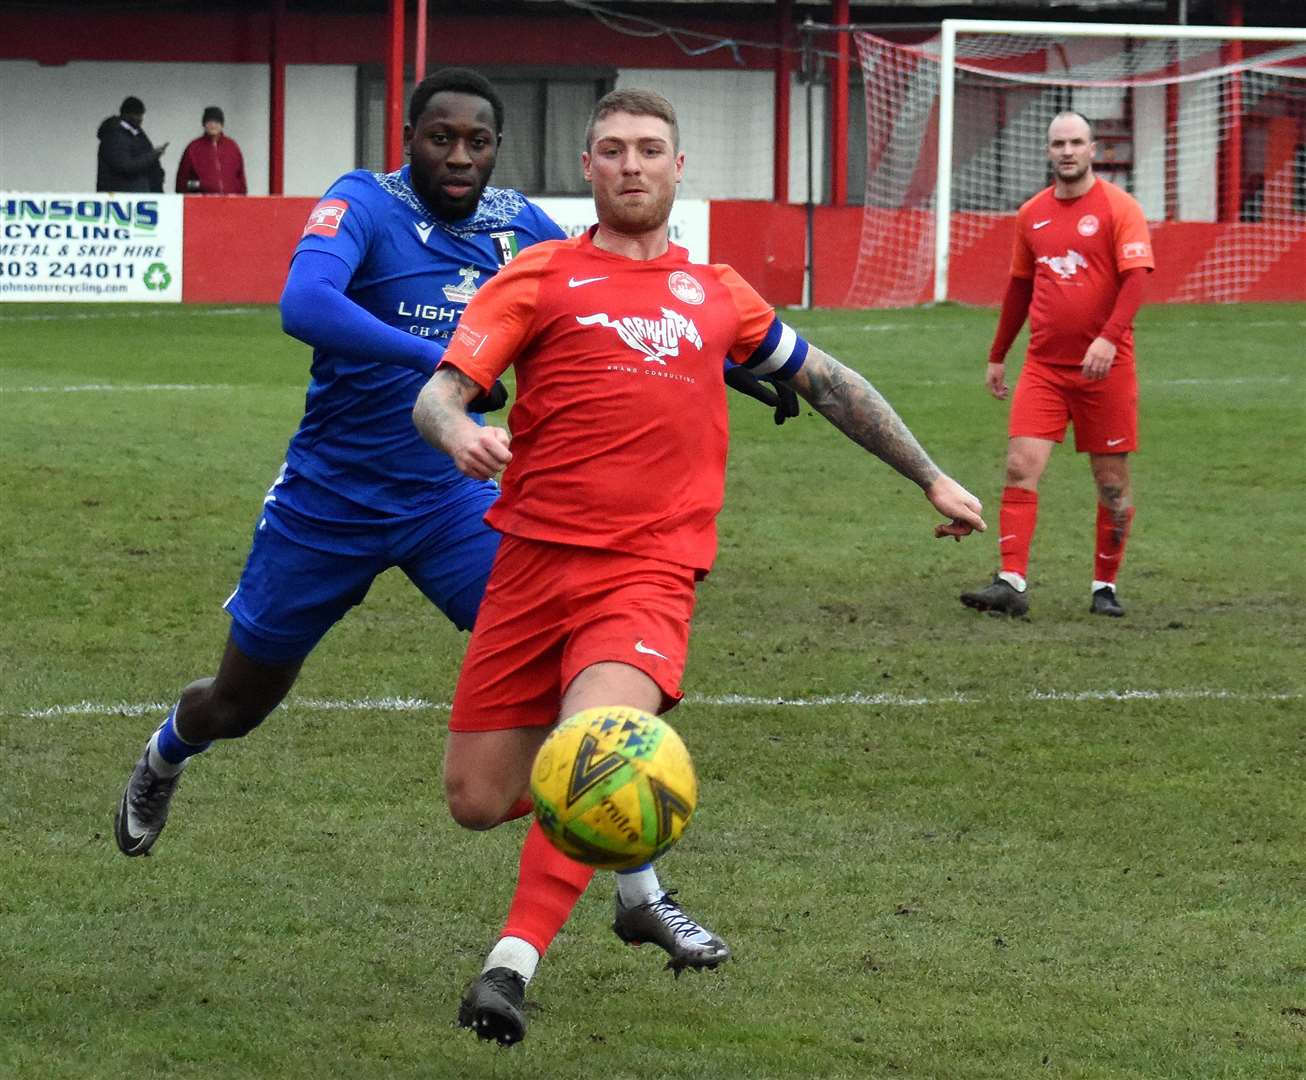 Charlie Webster has suffered a serious injury playing for Hythe Town Picture: Randolph File